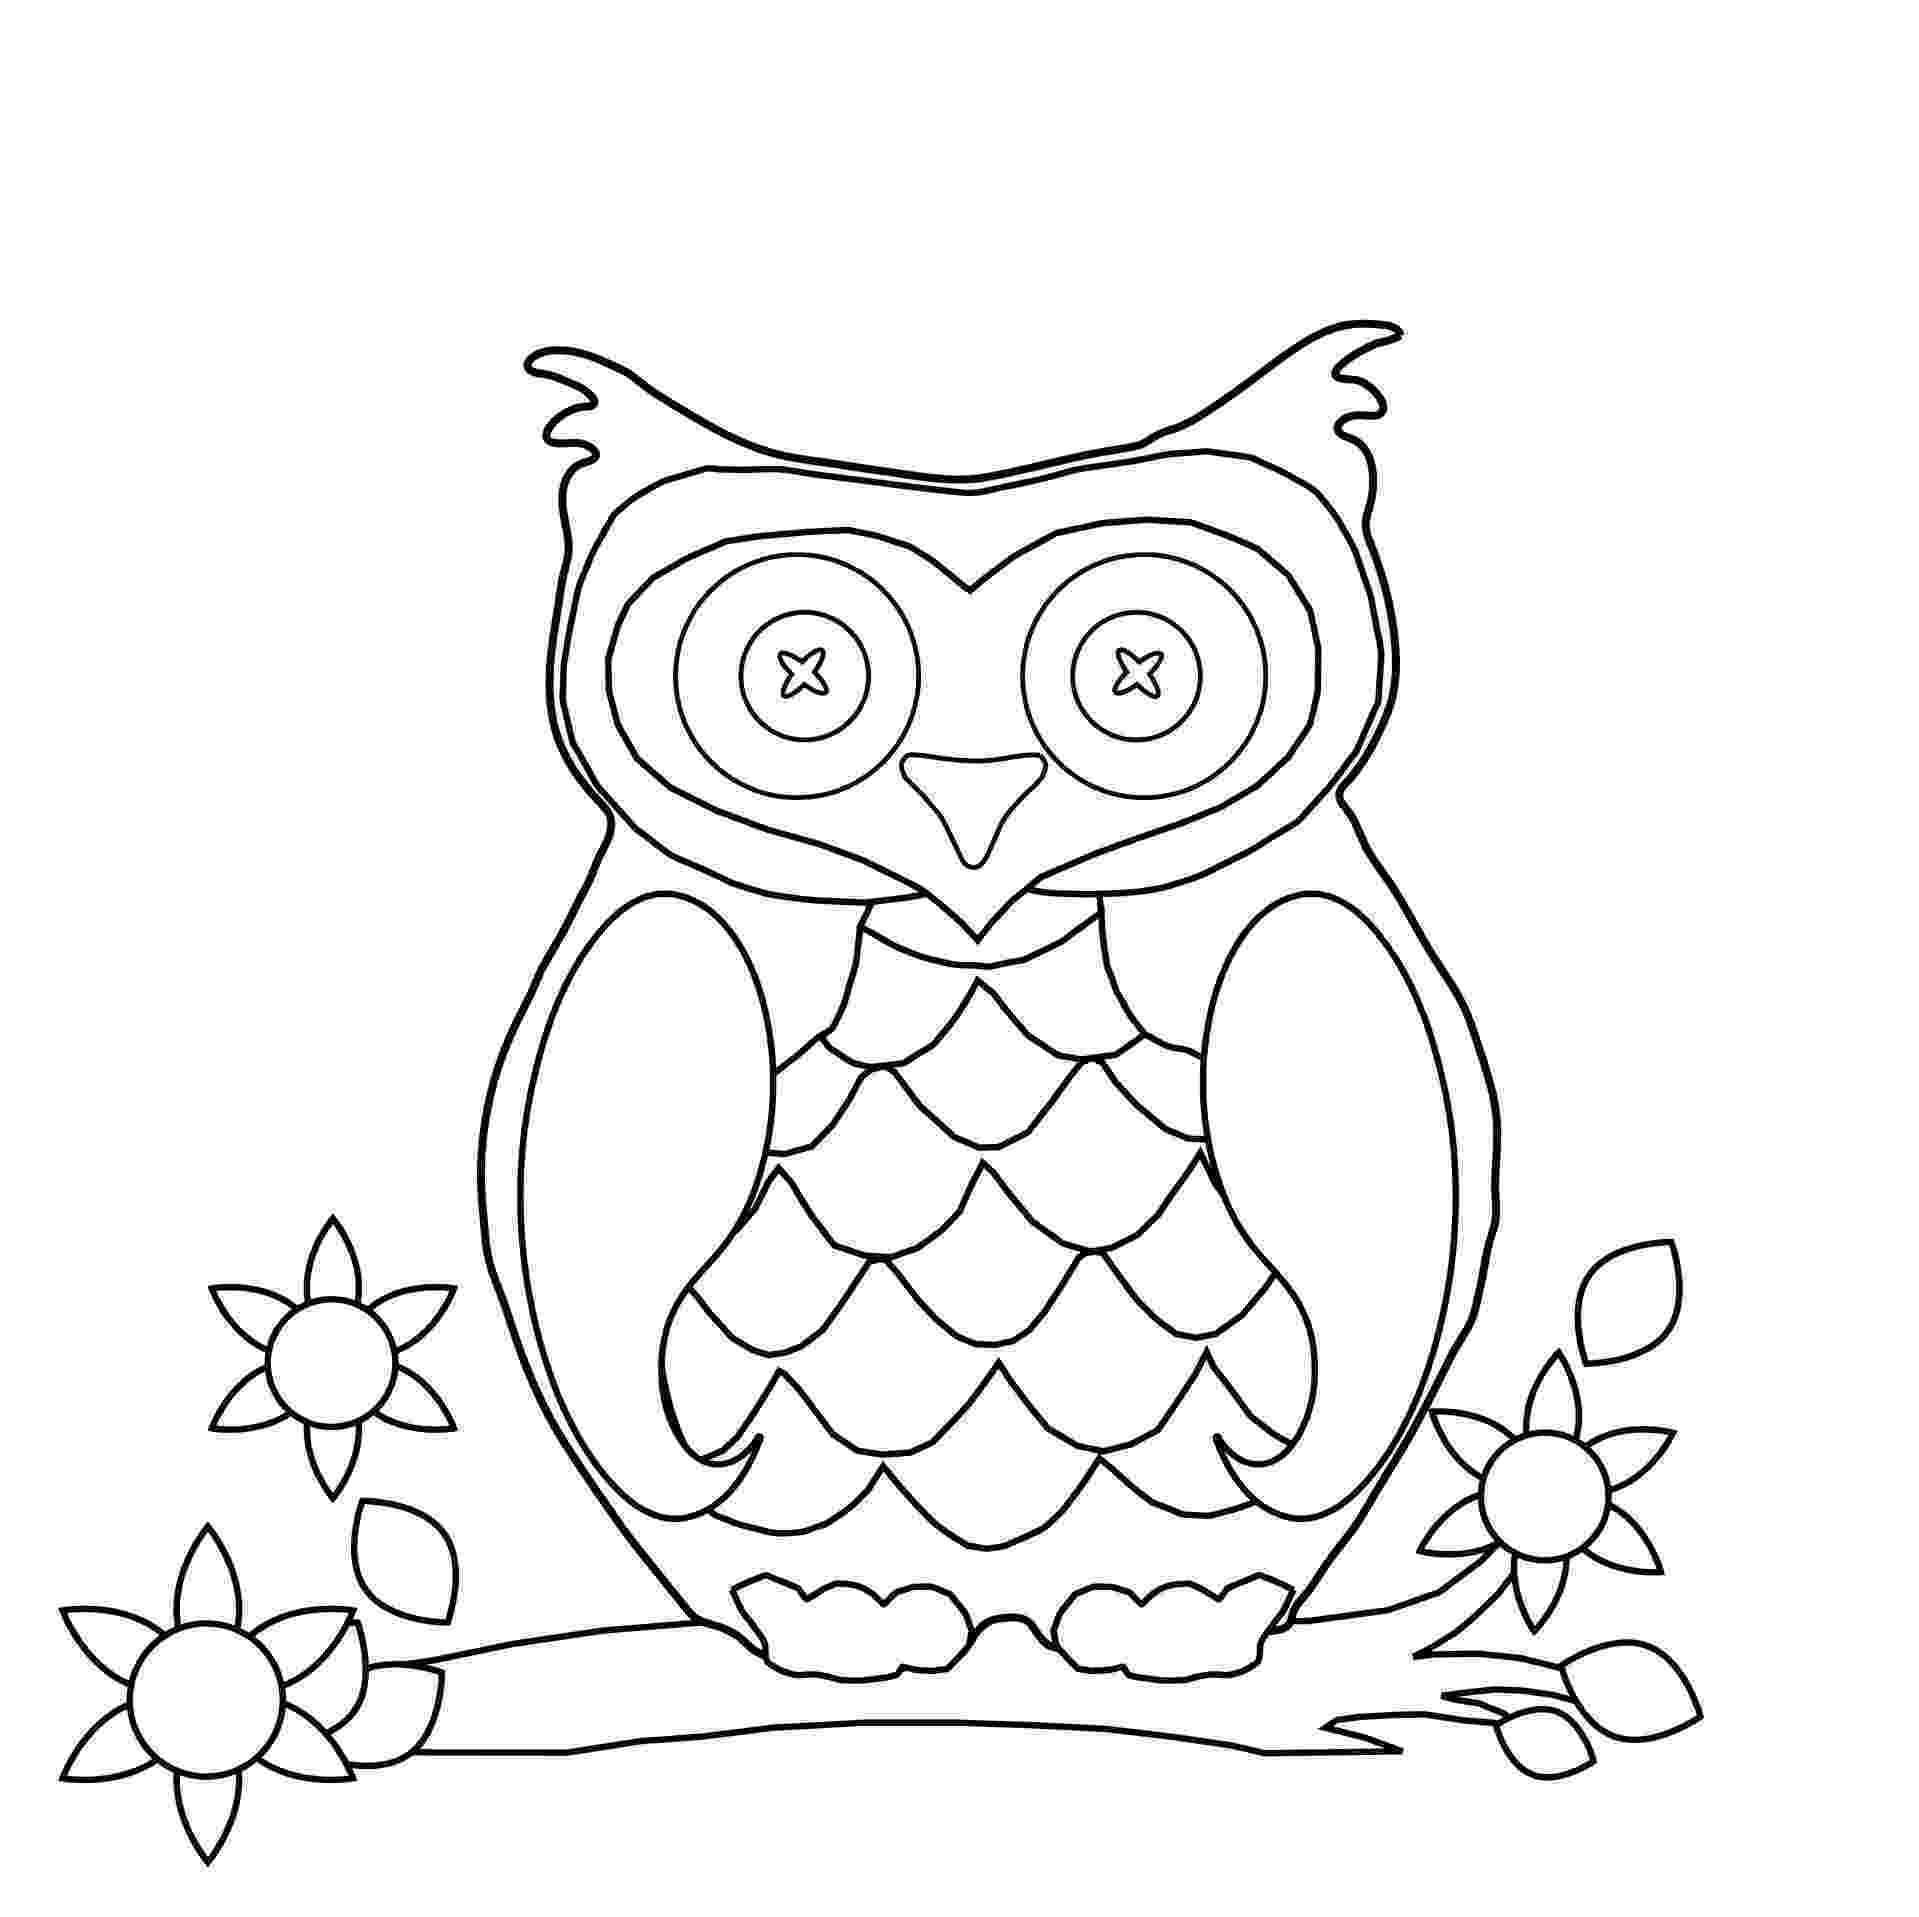 owl pictures to print and color cartoon owl coloring page free printable coloring pages print pictures color to owl and 